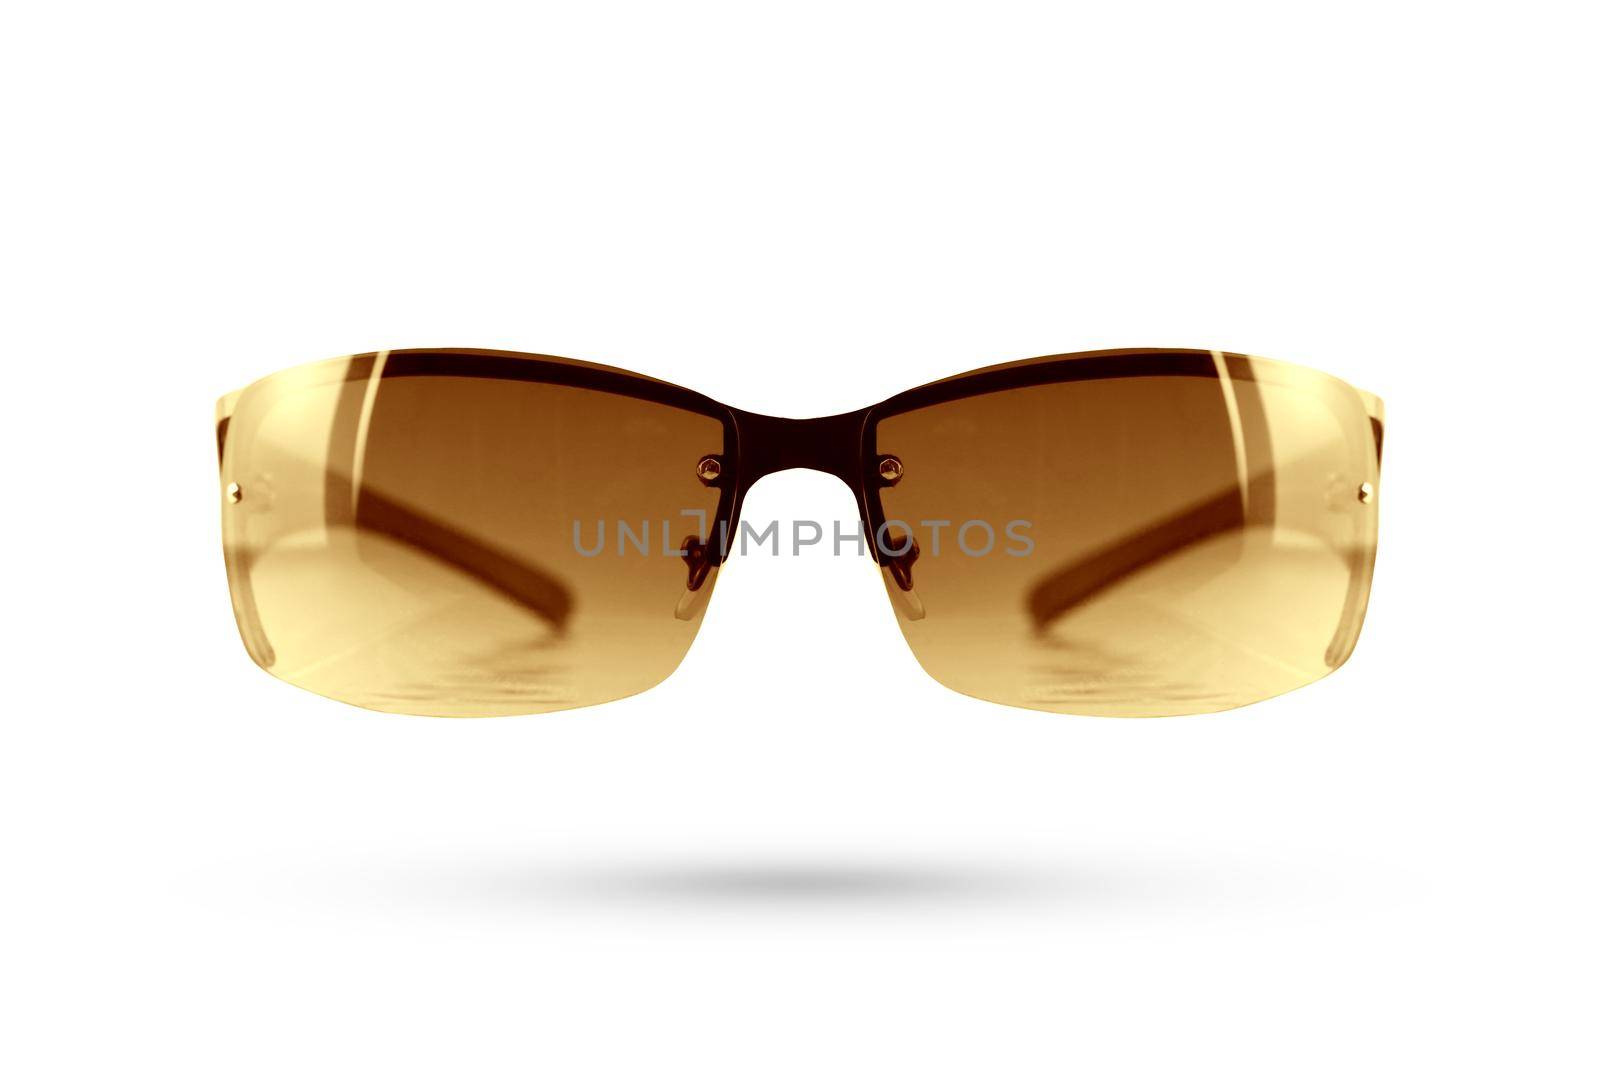 Sun glasses style isolated on white background.